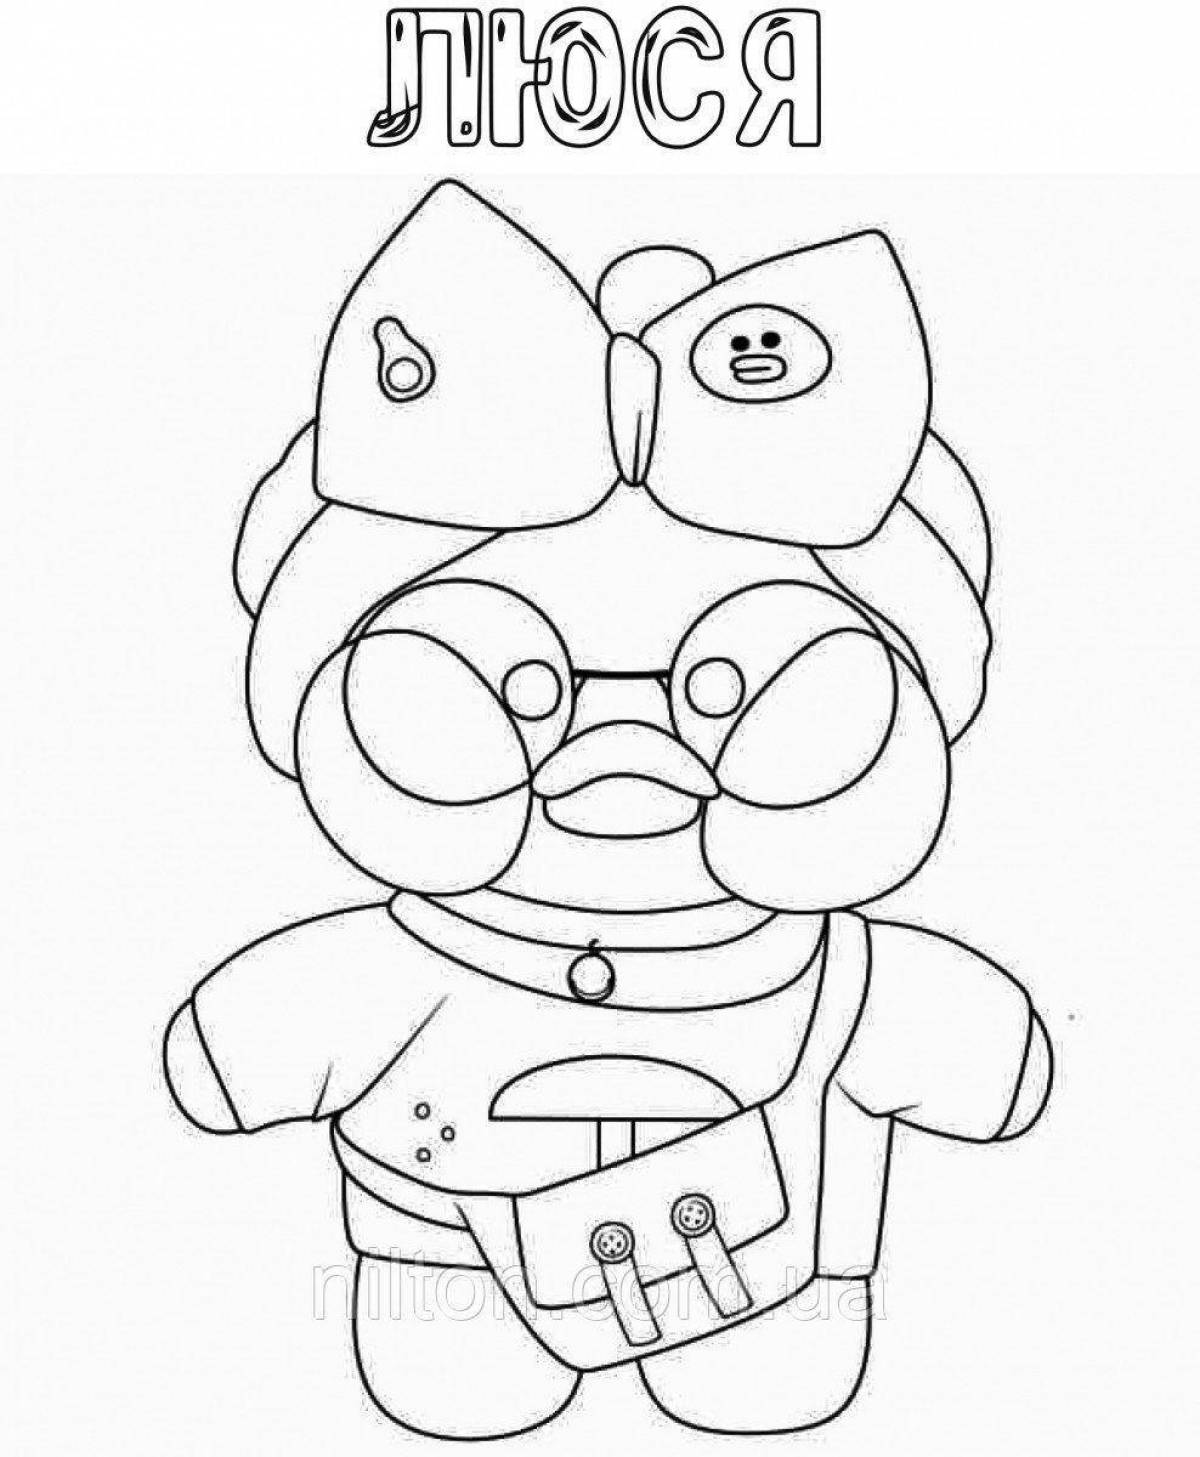 Coloring page charming lola fanfan